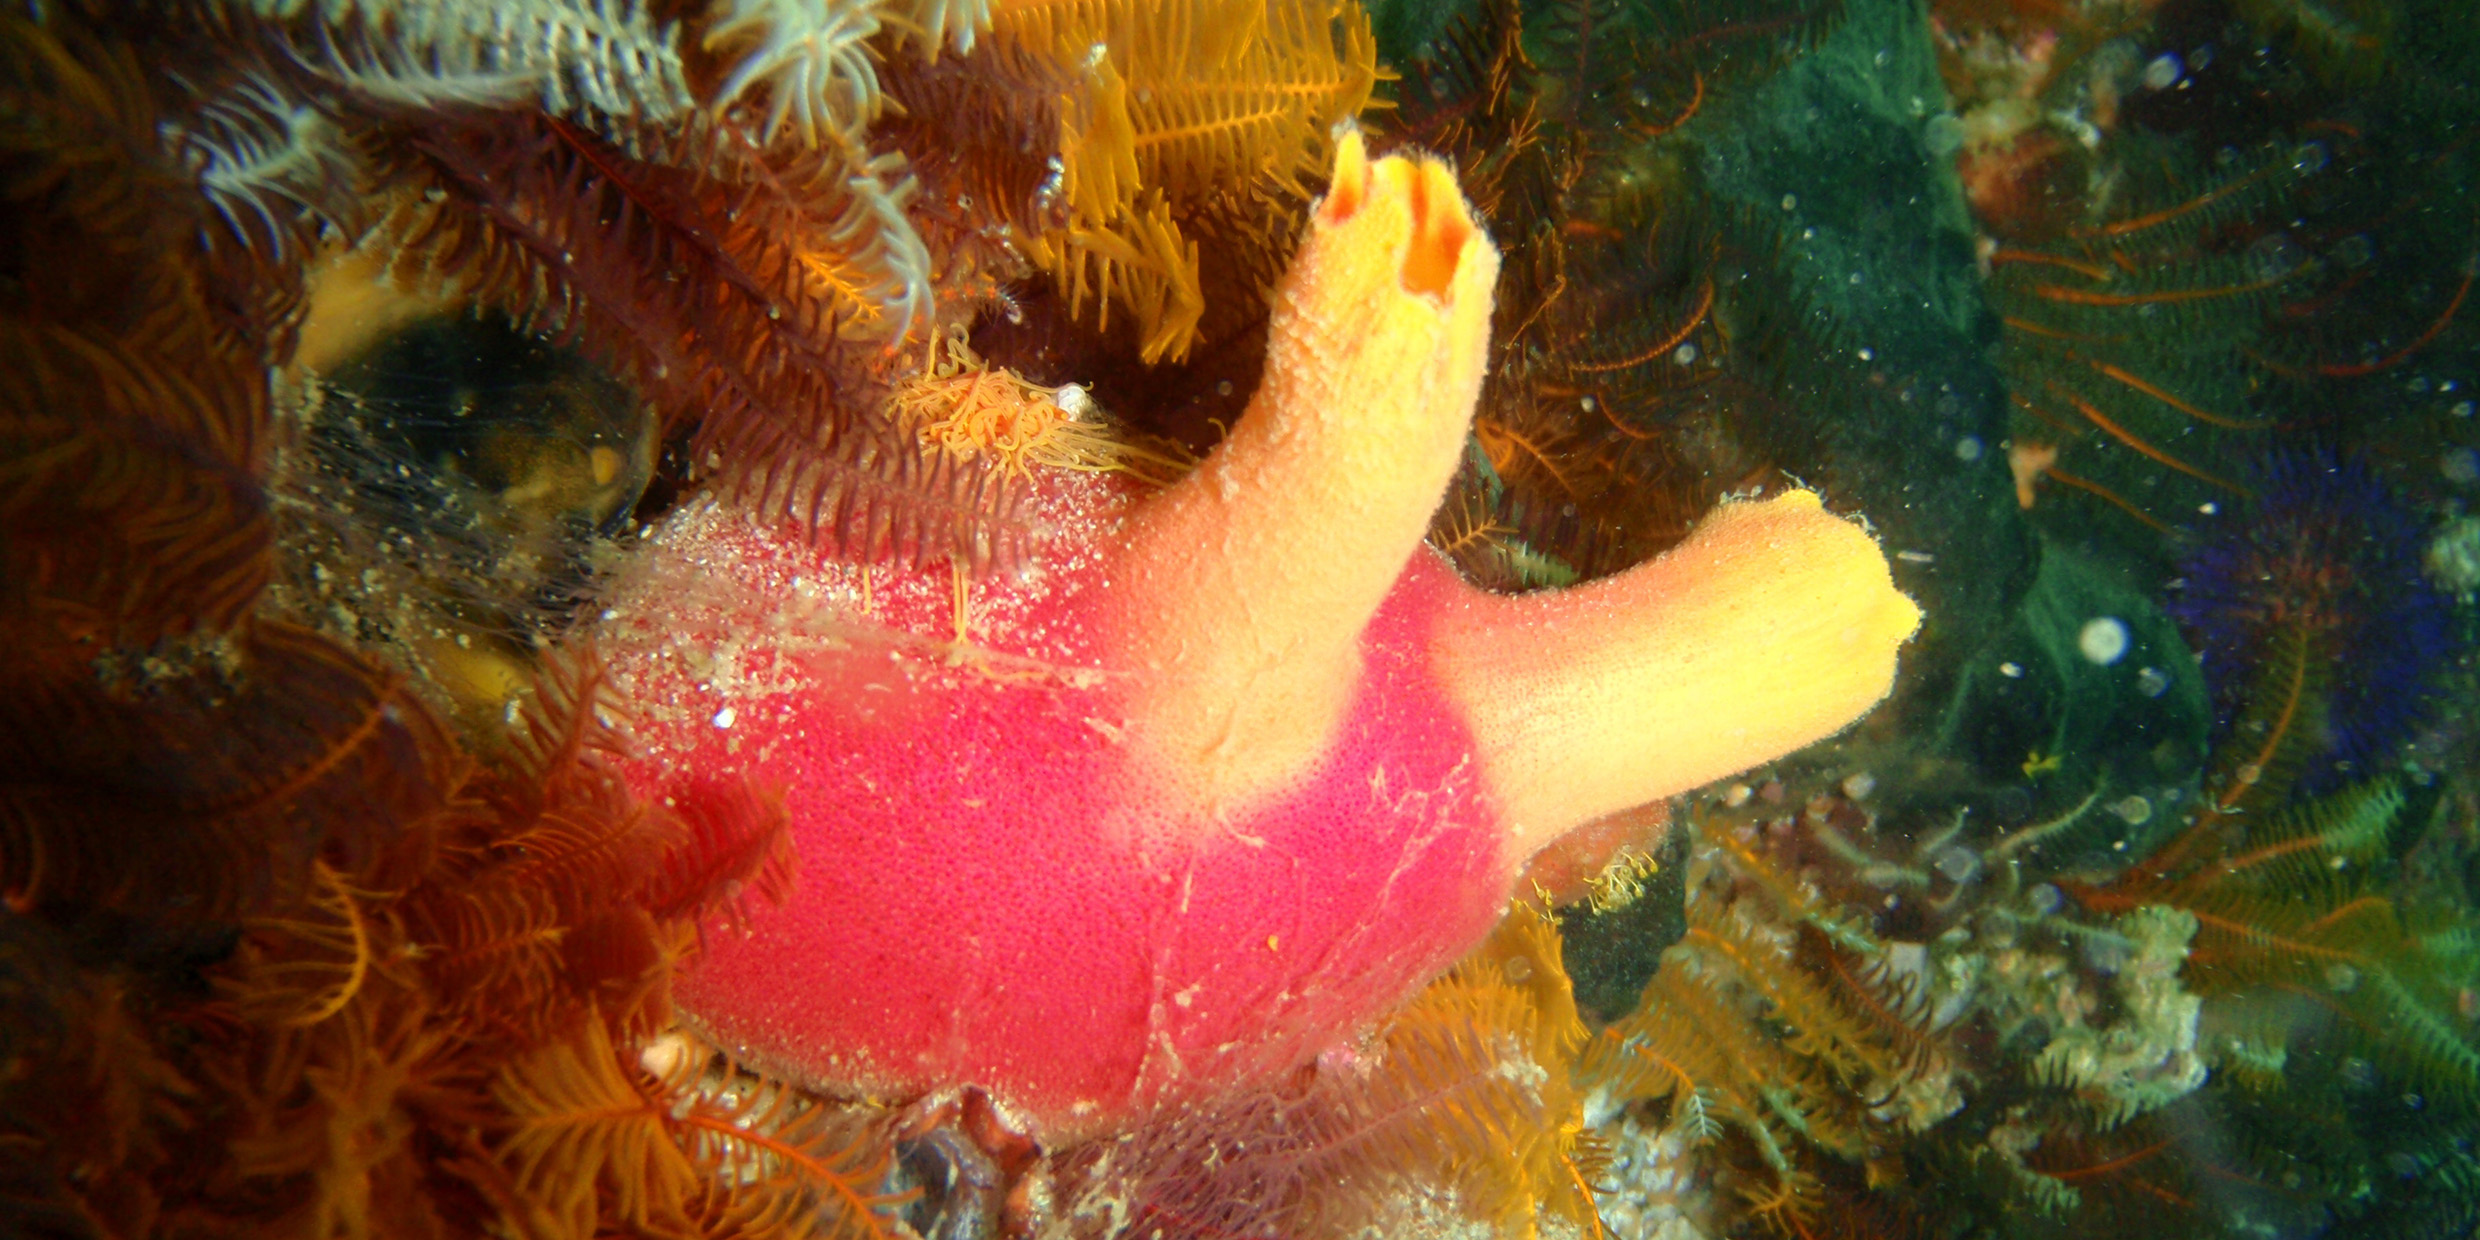 Image of a sea squirt